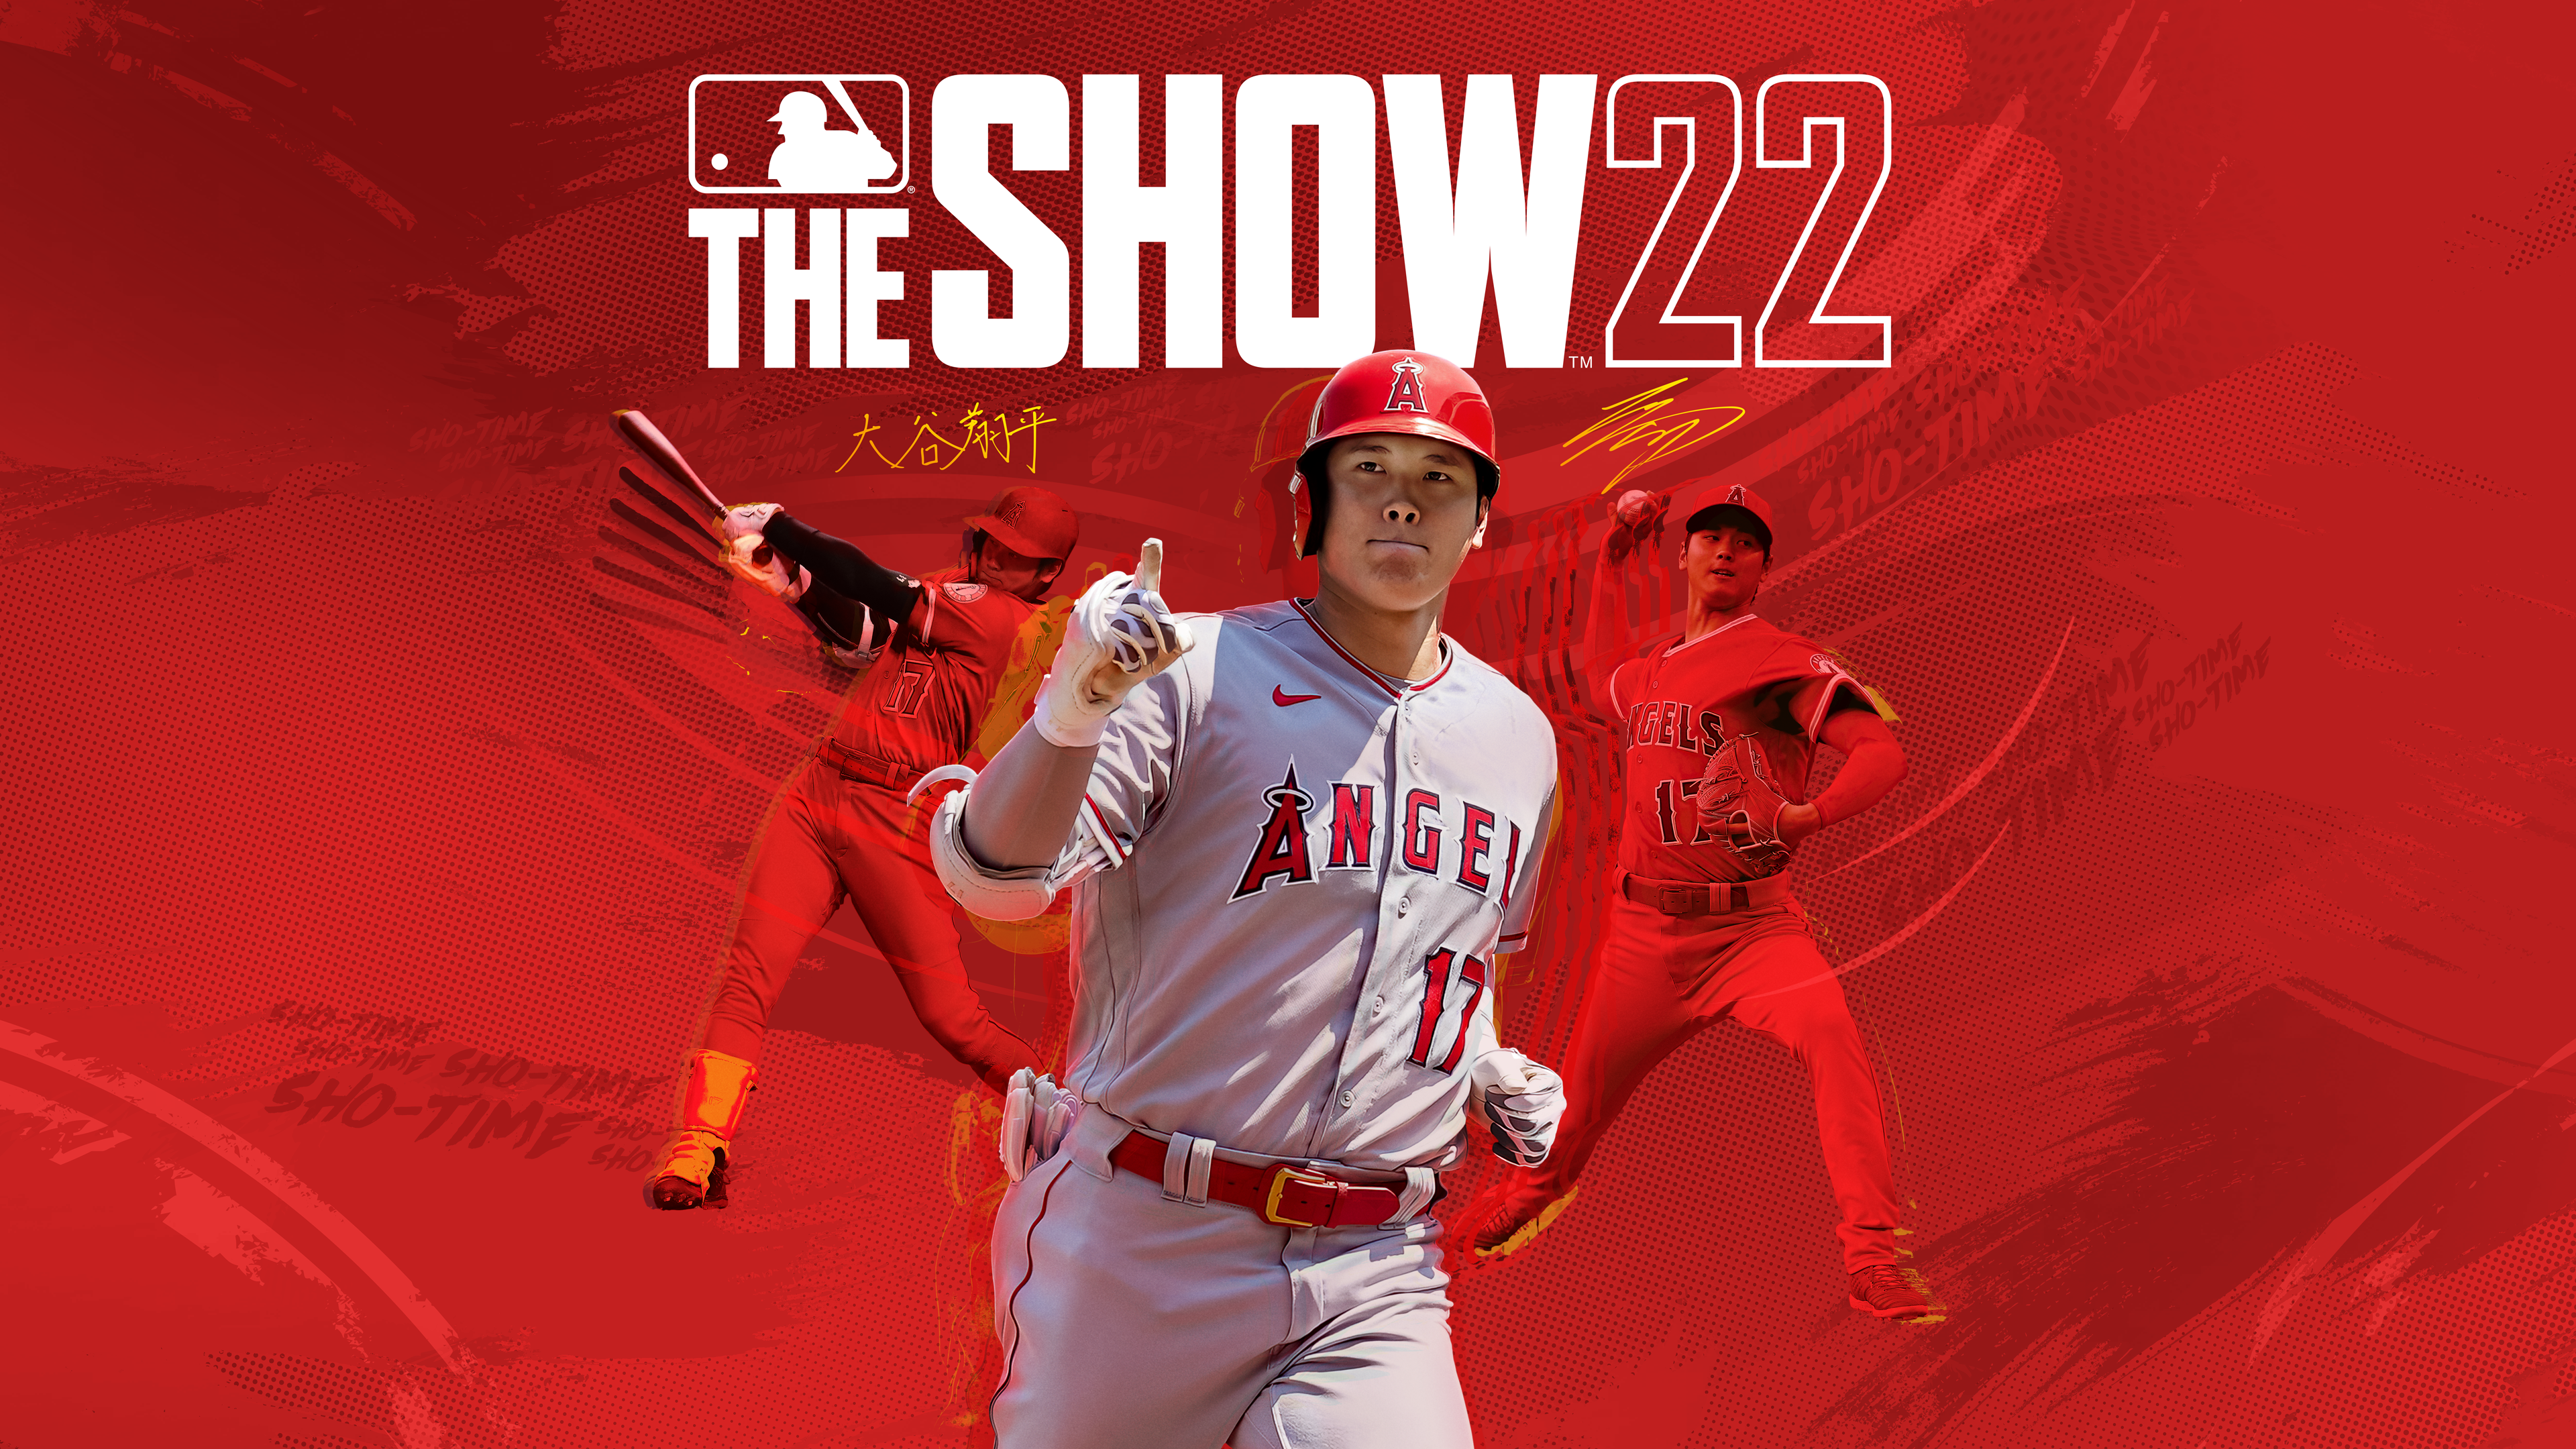 MLB The Show 22: The Review Archysport